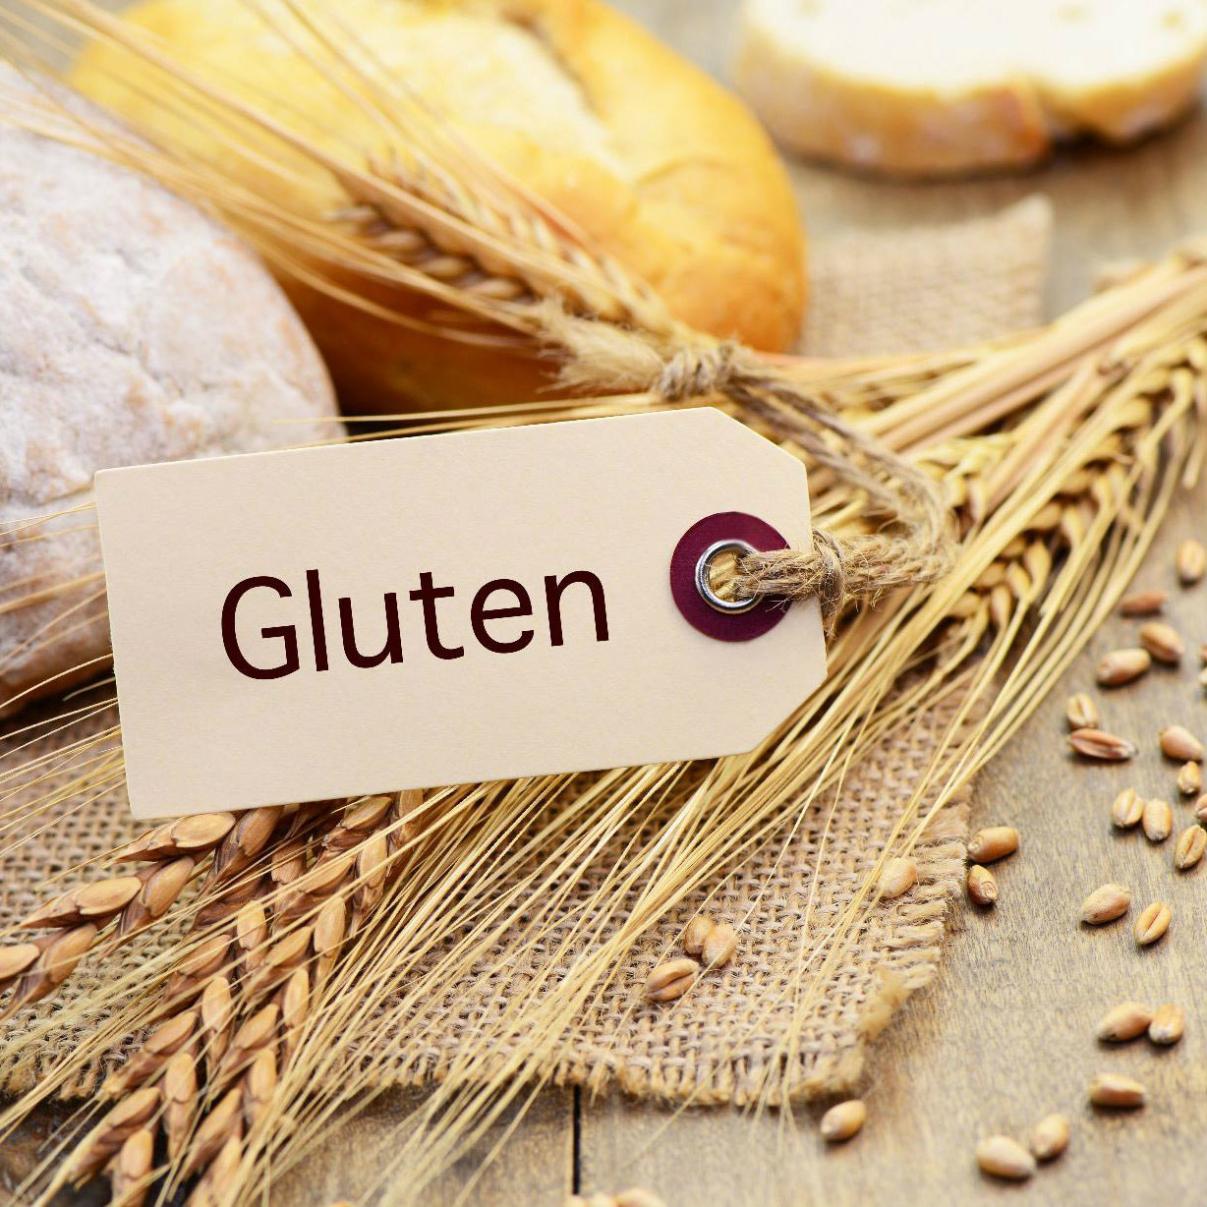 The Future Of Gluten-Free Food: What Exciting Innovations Can We Expect?